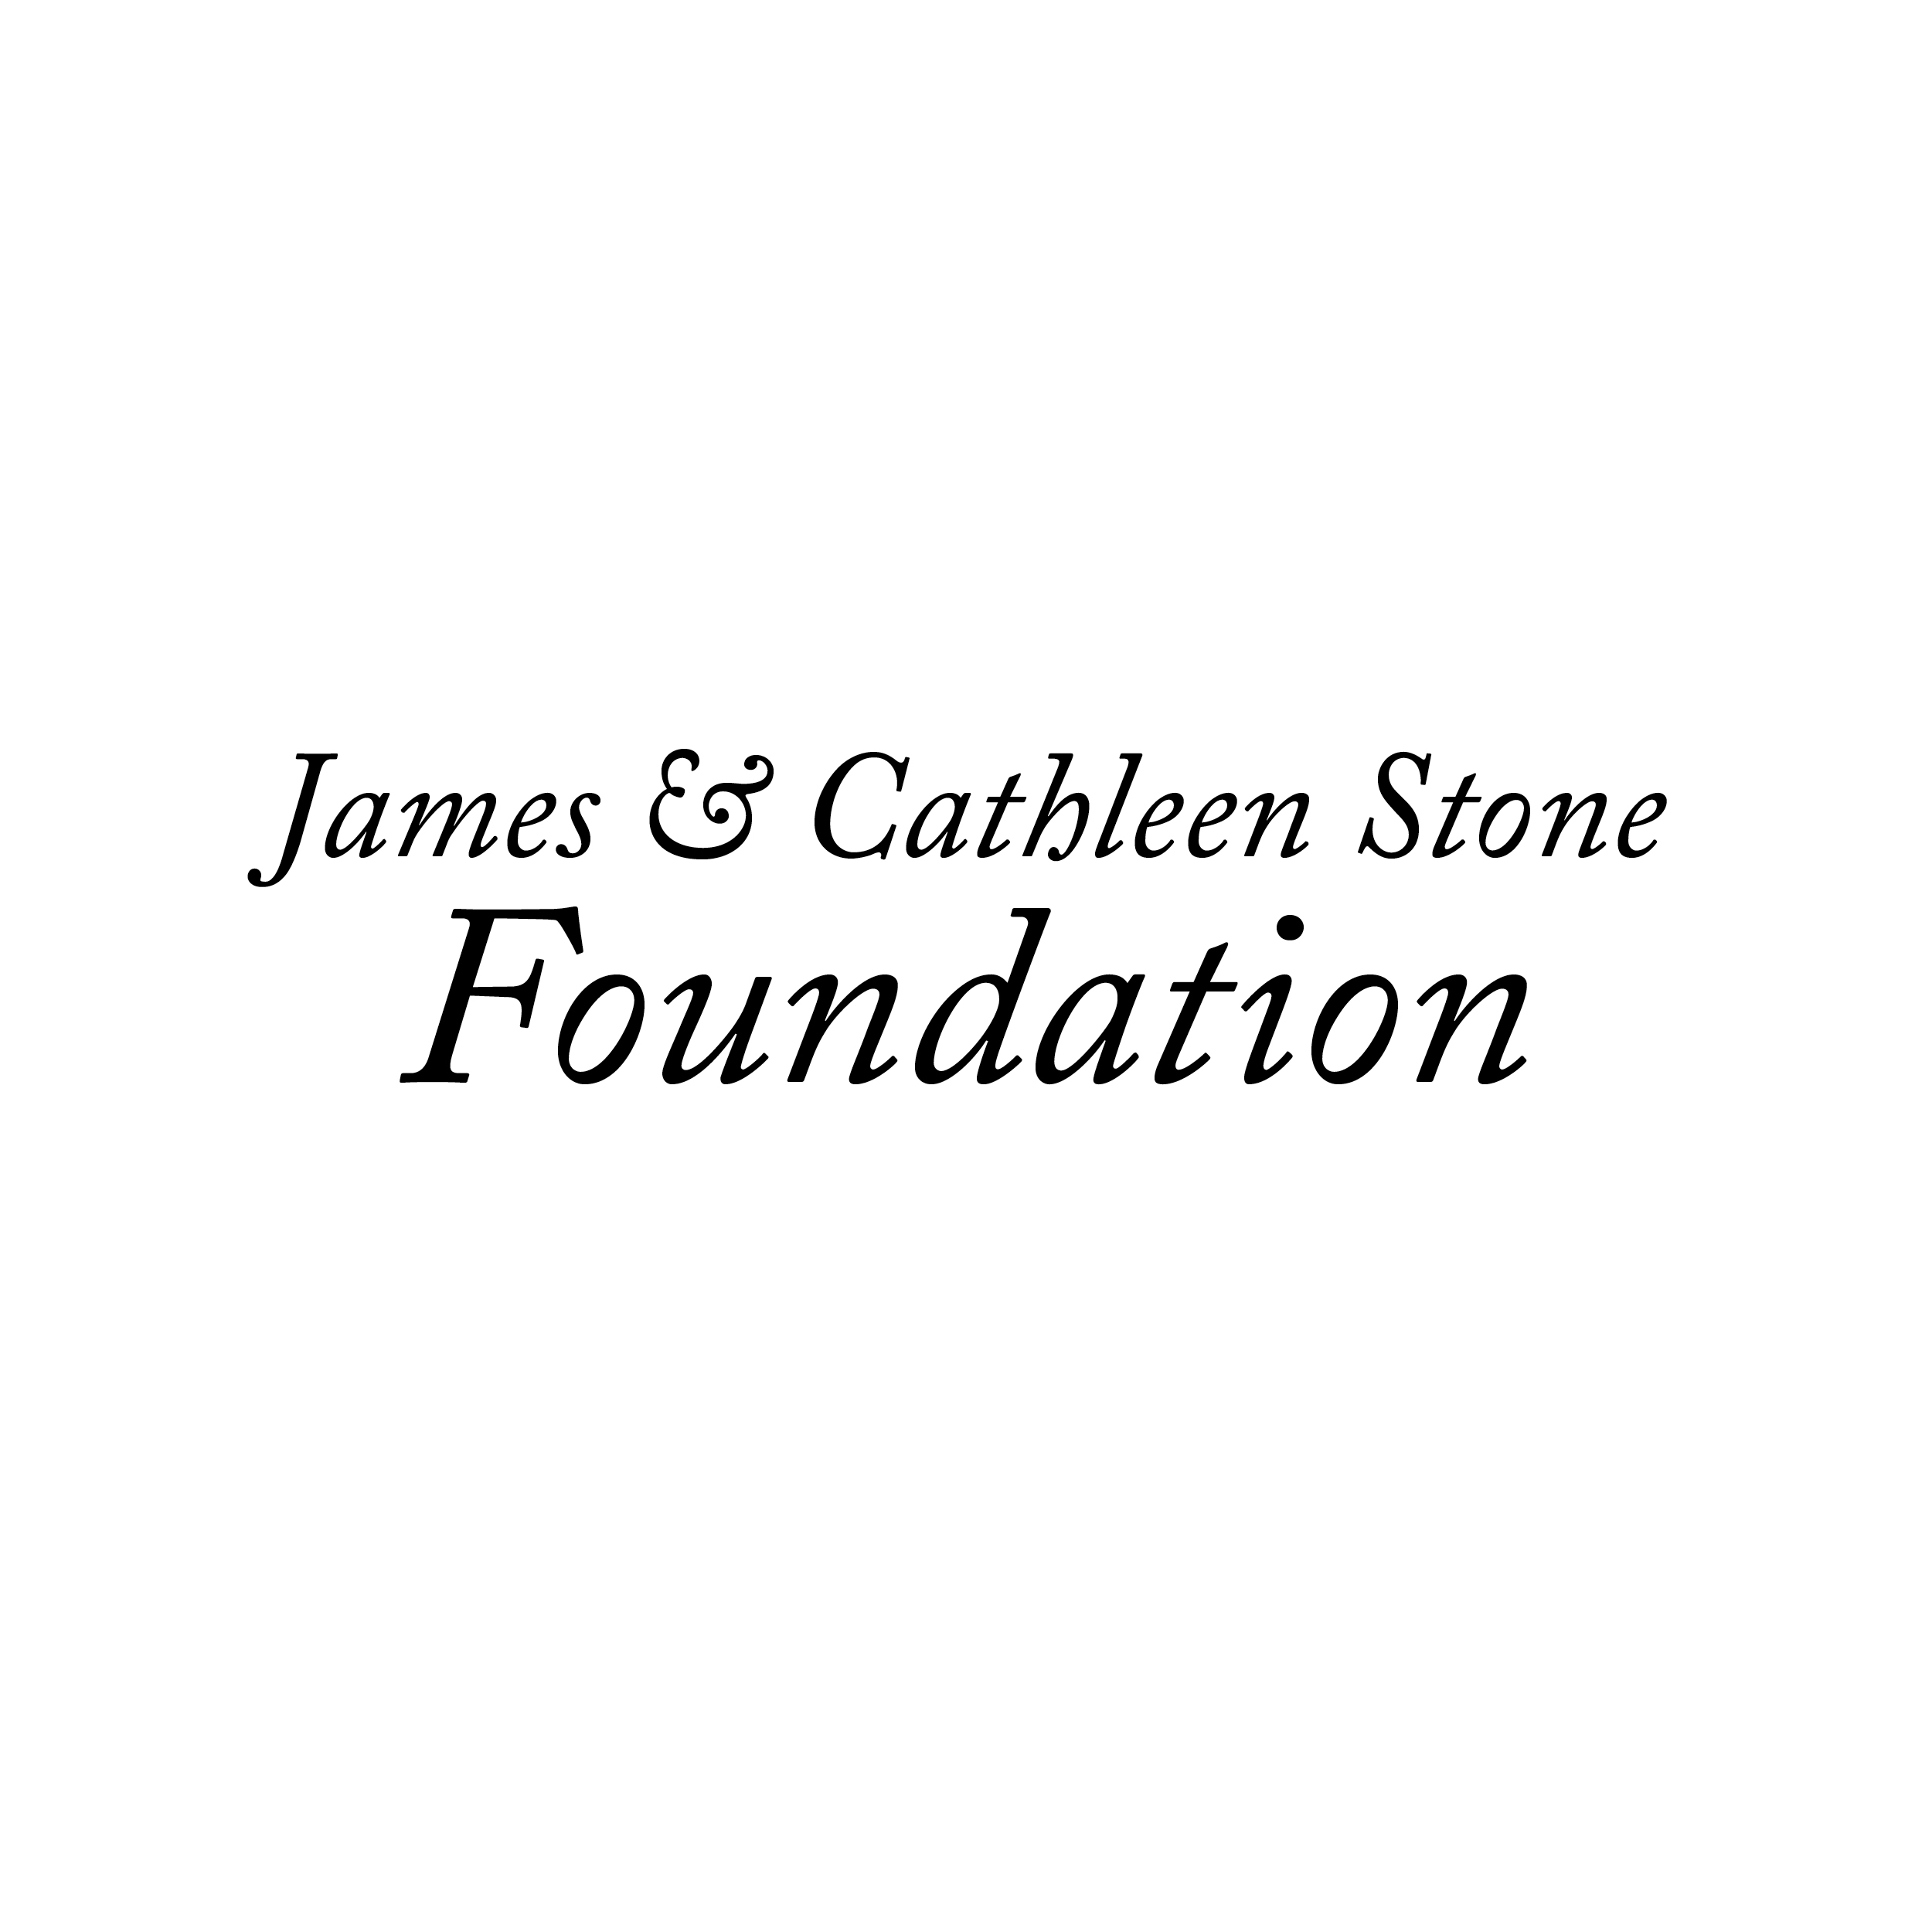 James and Cathleen Stone Foundation